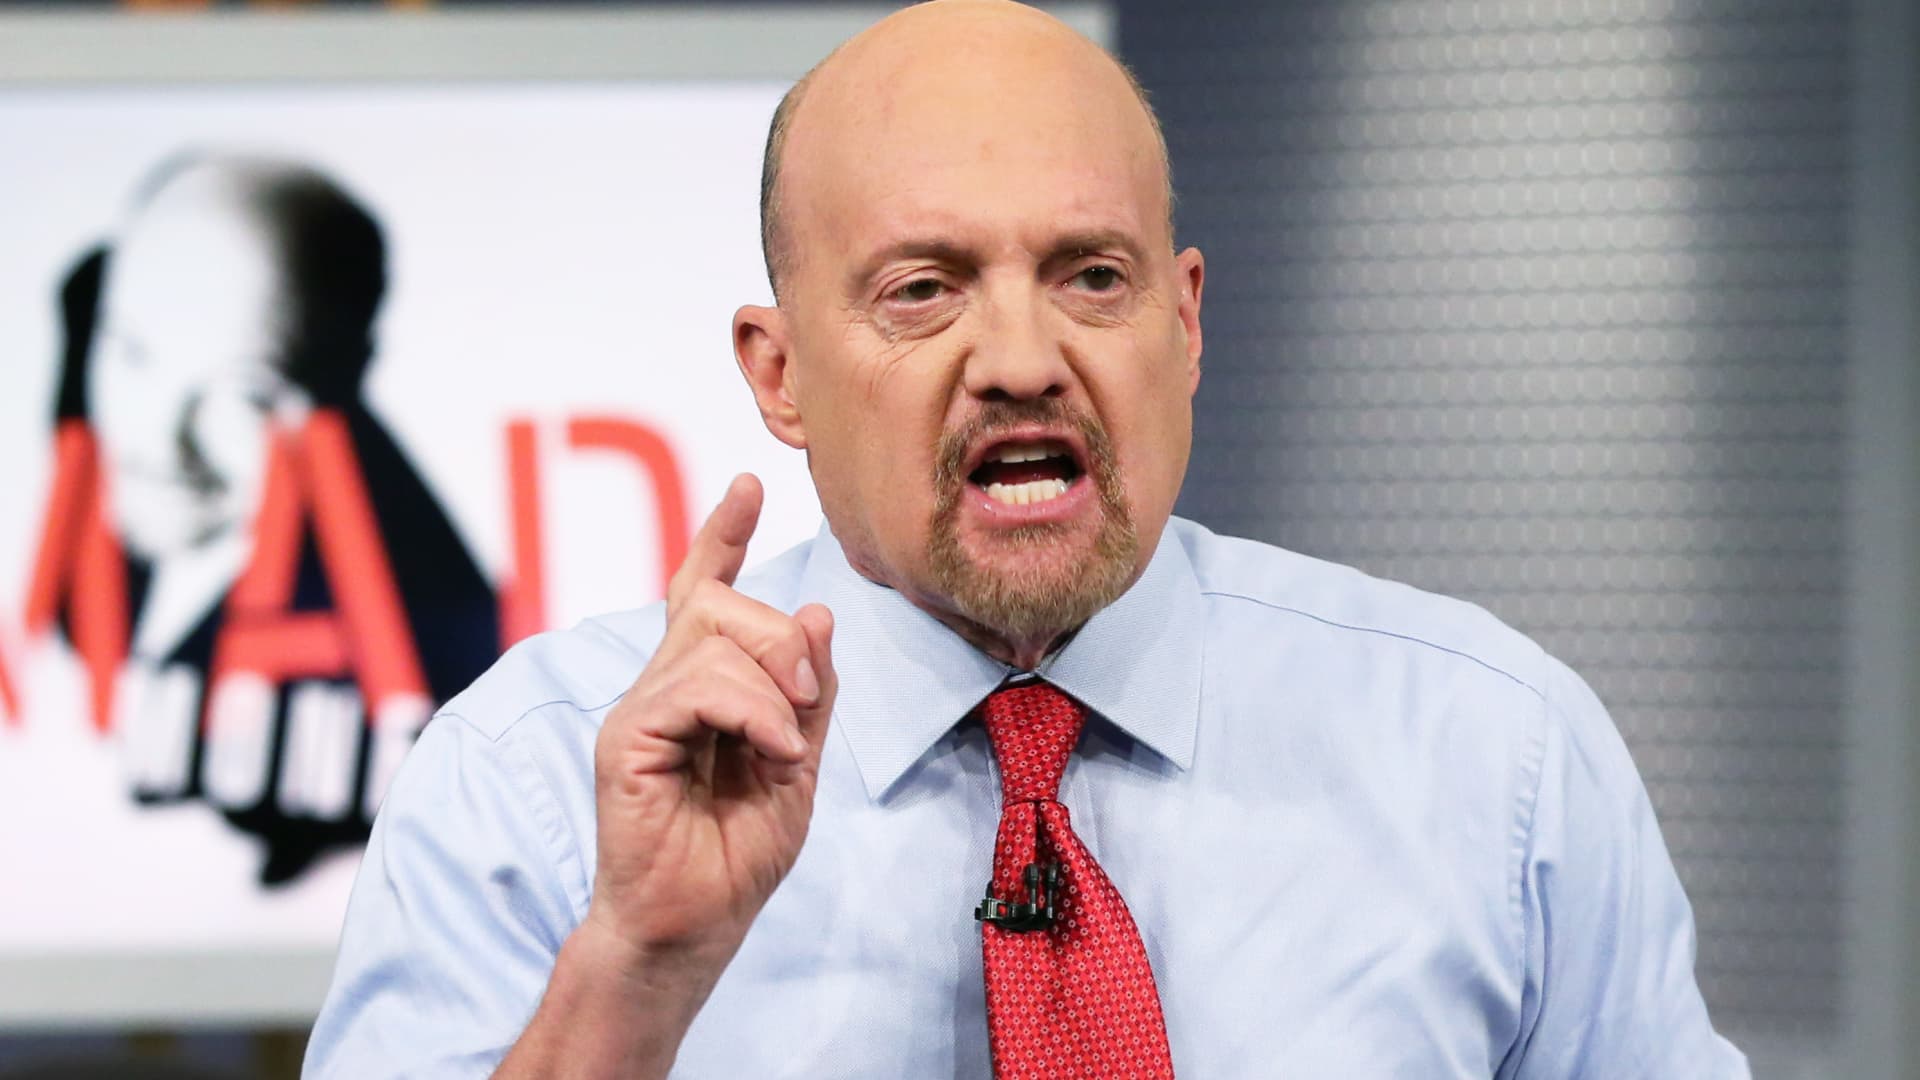 Jim Cramer says he likes stocks in these 4 industries over tech right now - CNBC (Picture 1)